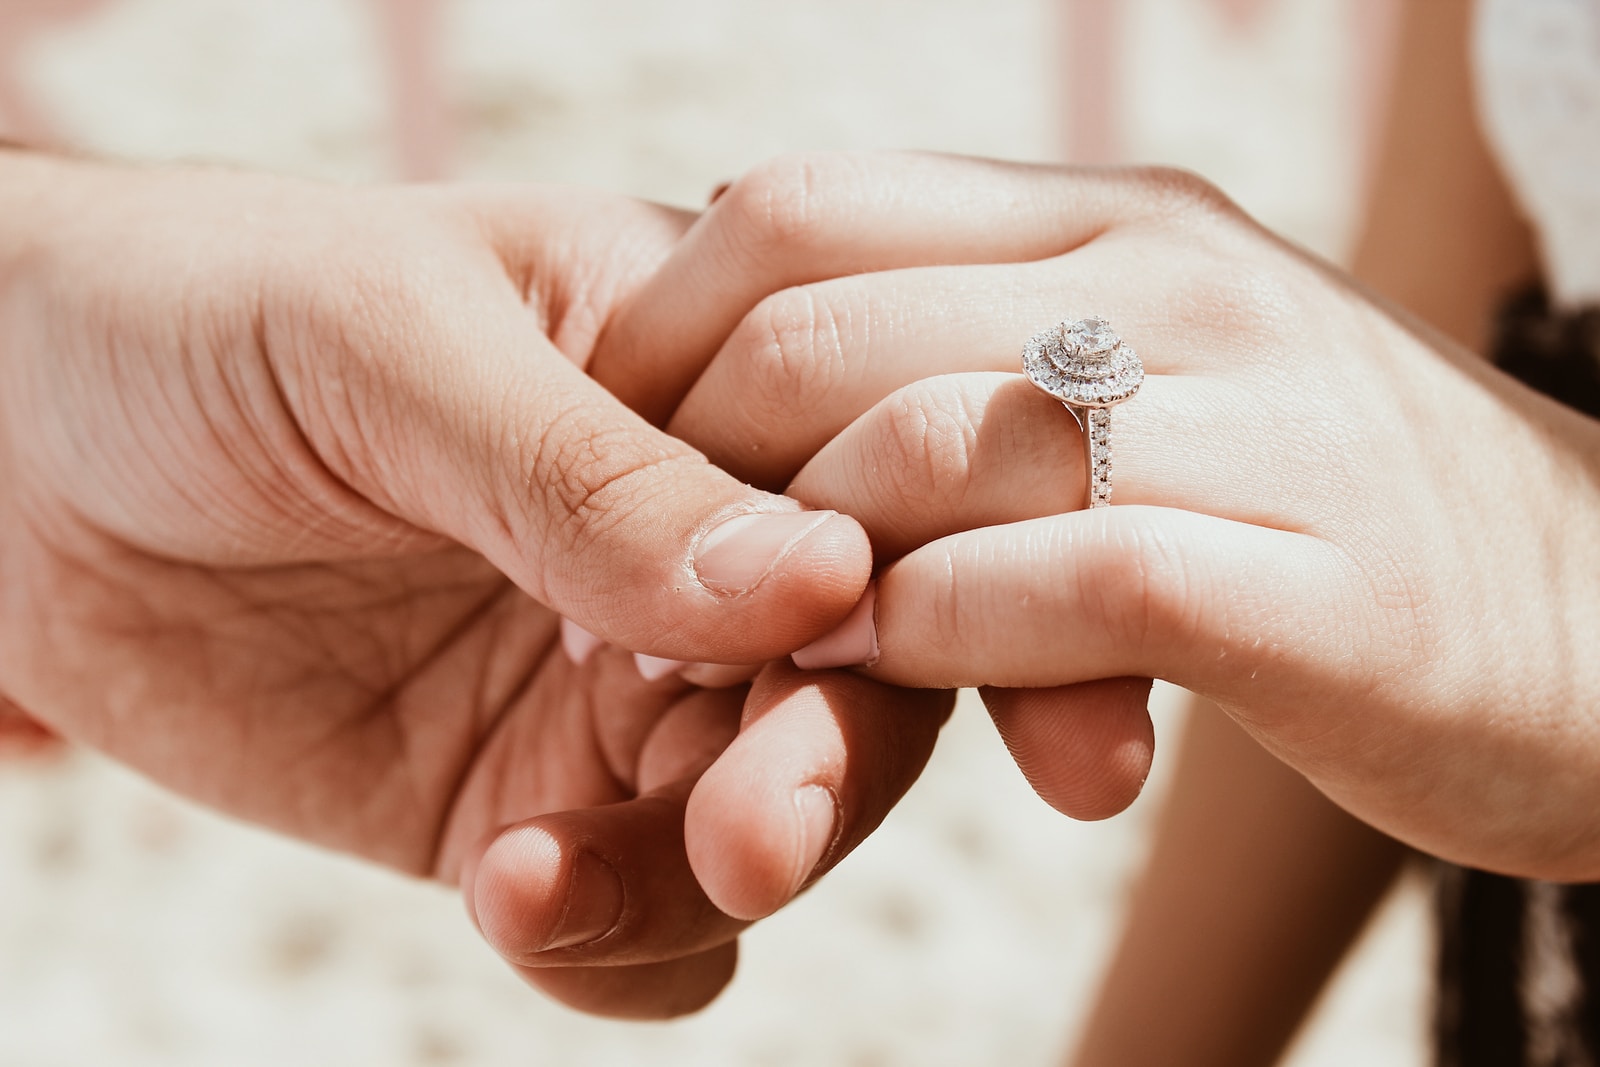 Romantic Partner Proposing person holding another person's hand with ring